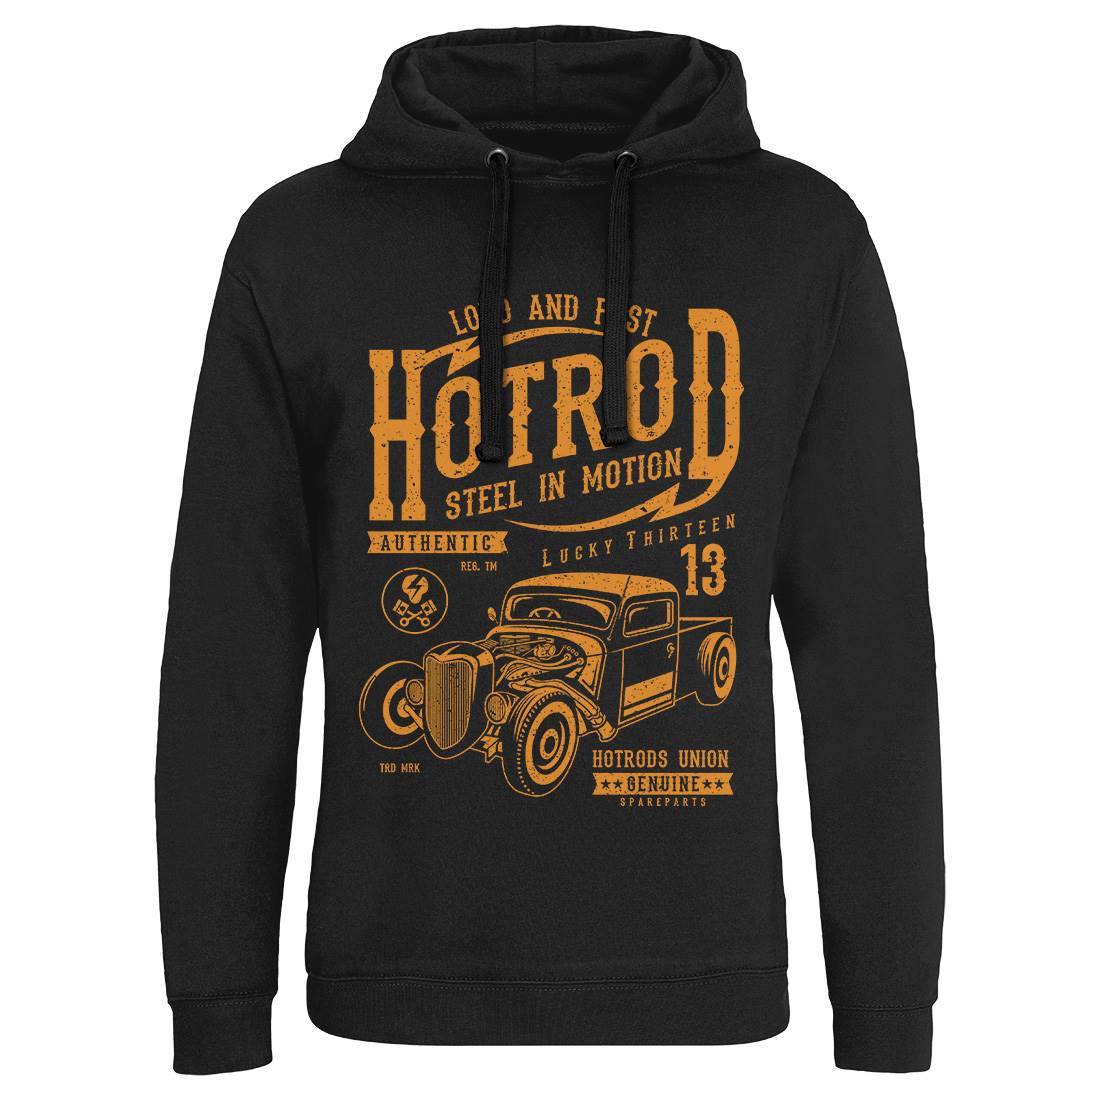 Steel In Motion Mens Hoodie Without Pocket Cars A767